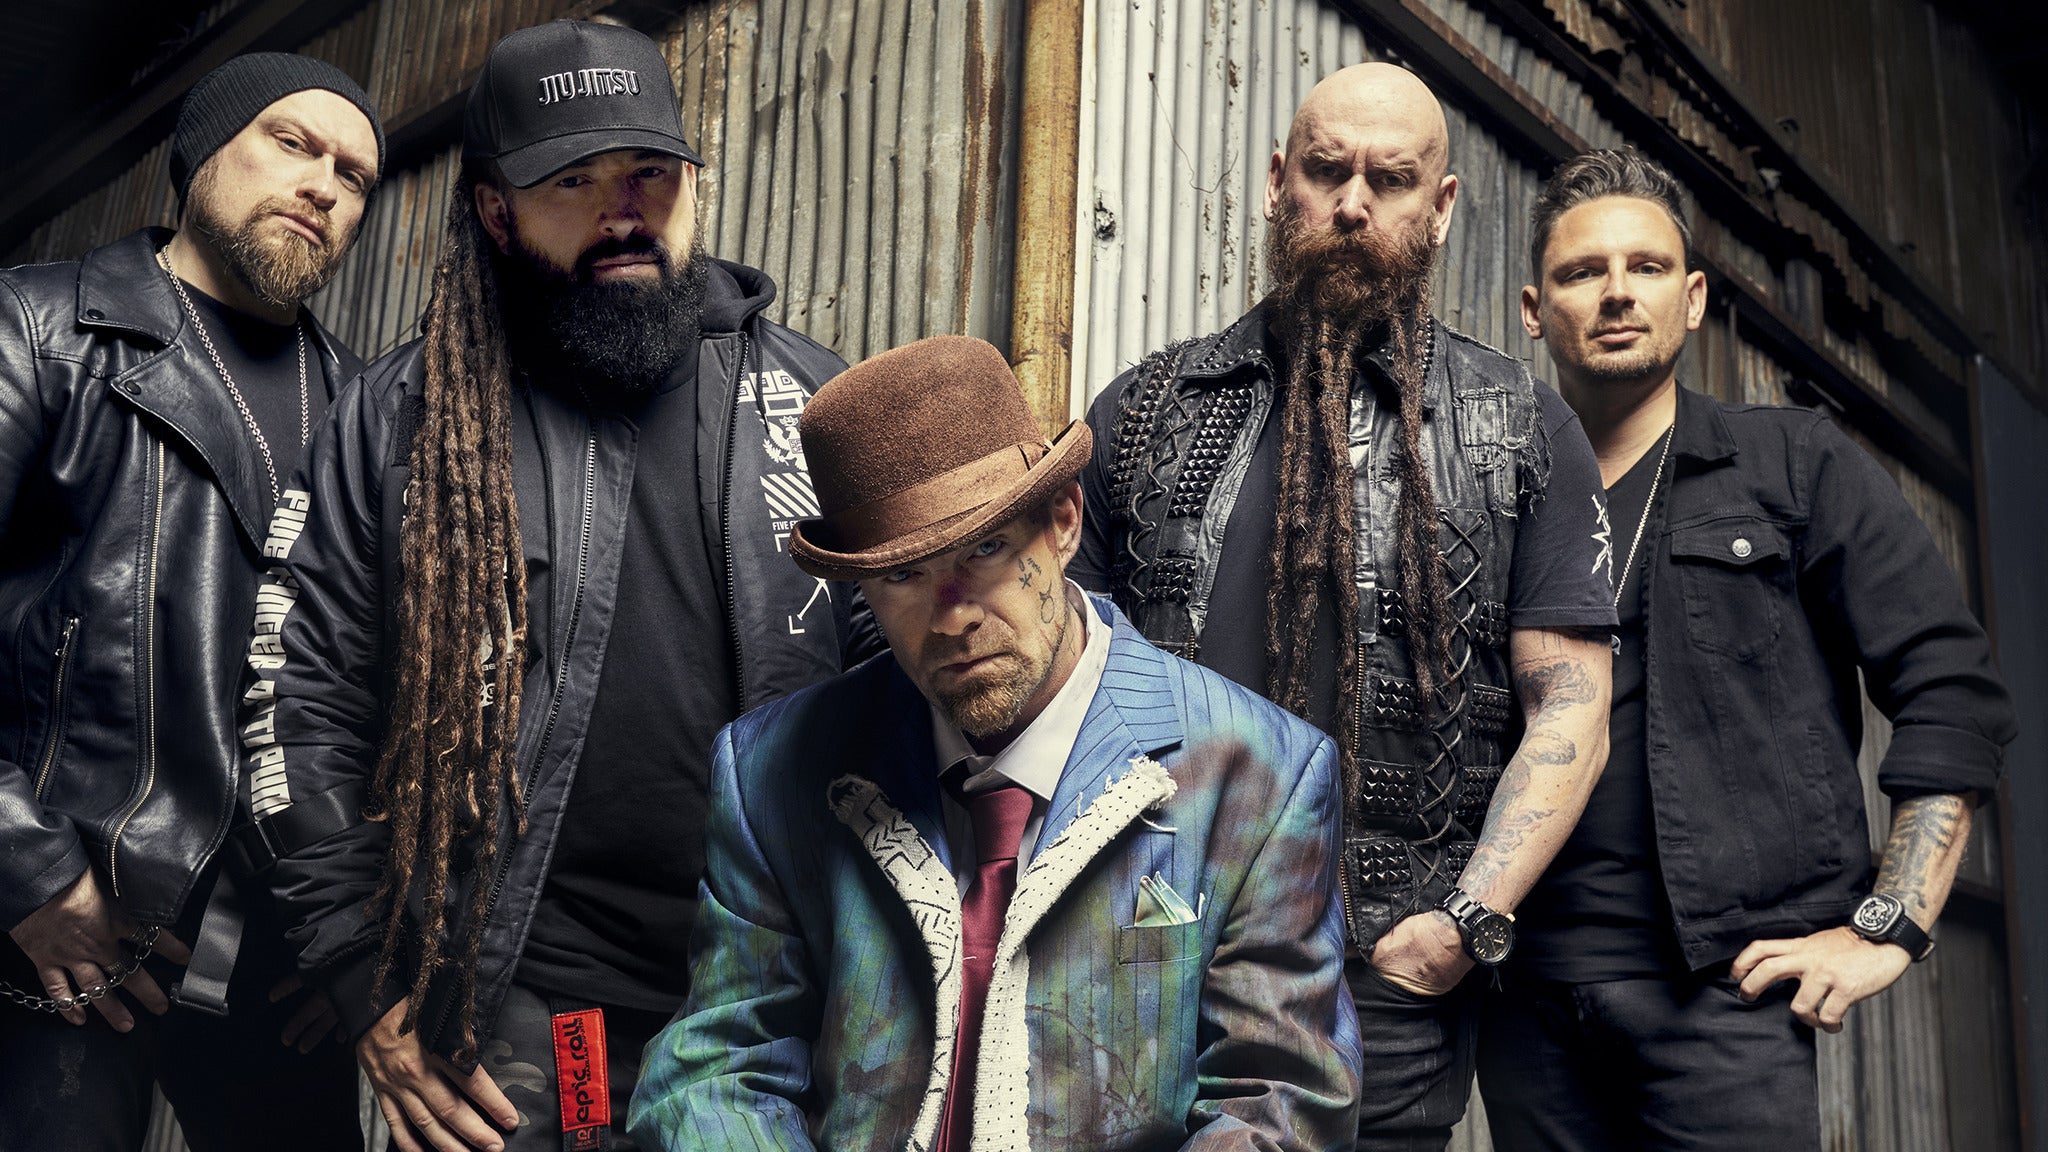 Five Finger Death Punch + Brantley Gilbert pre-sale password for performance tickets in Kansas City, MO (T-Mobile Center)